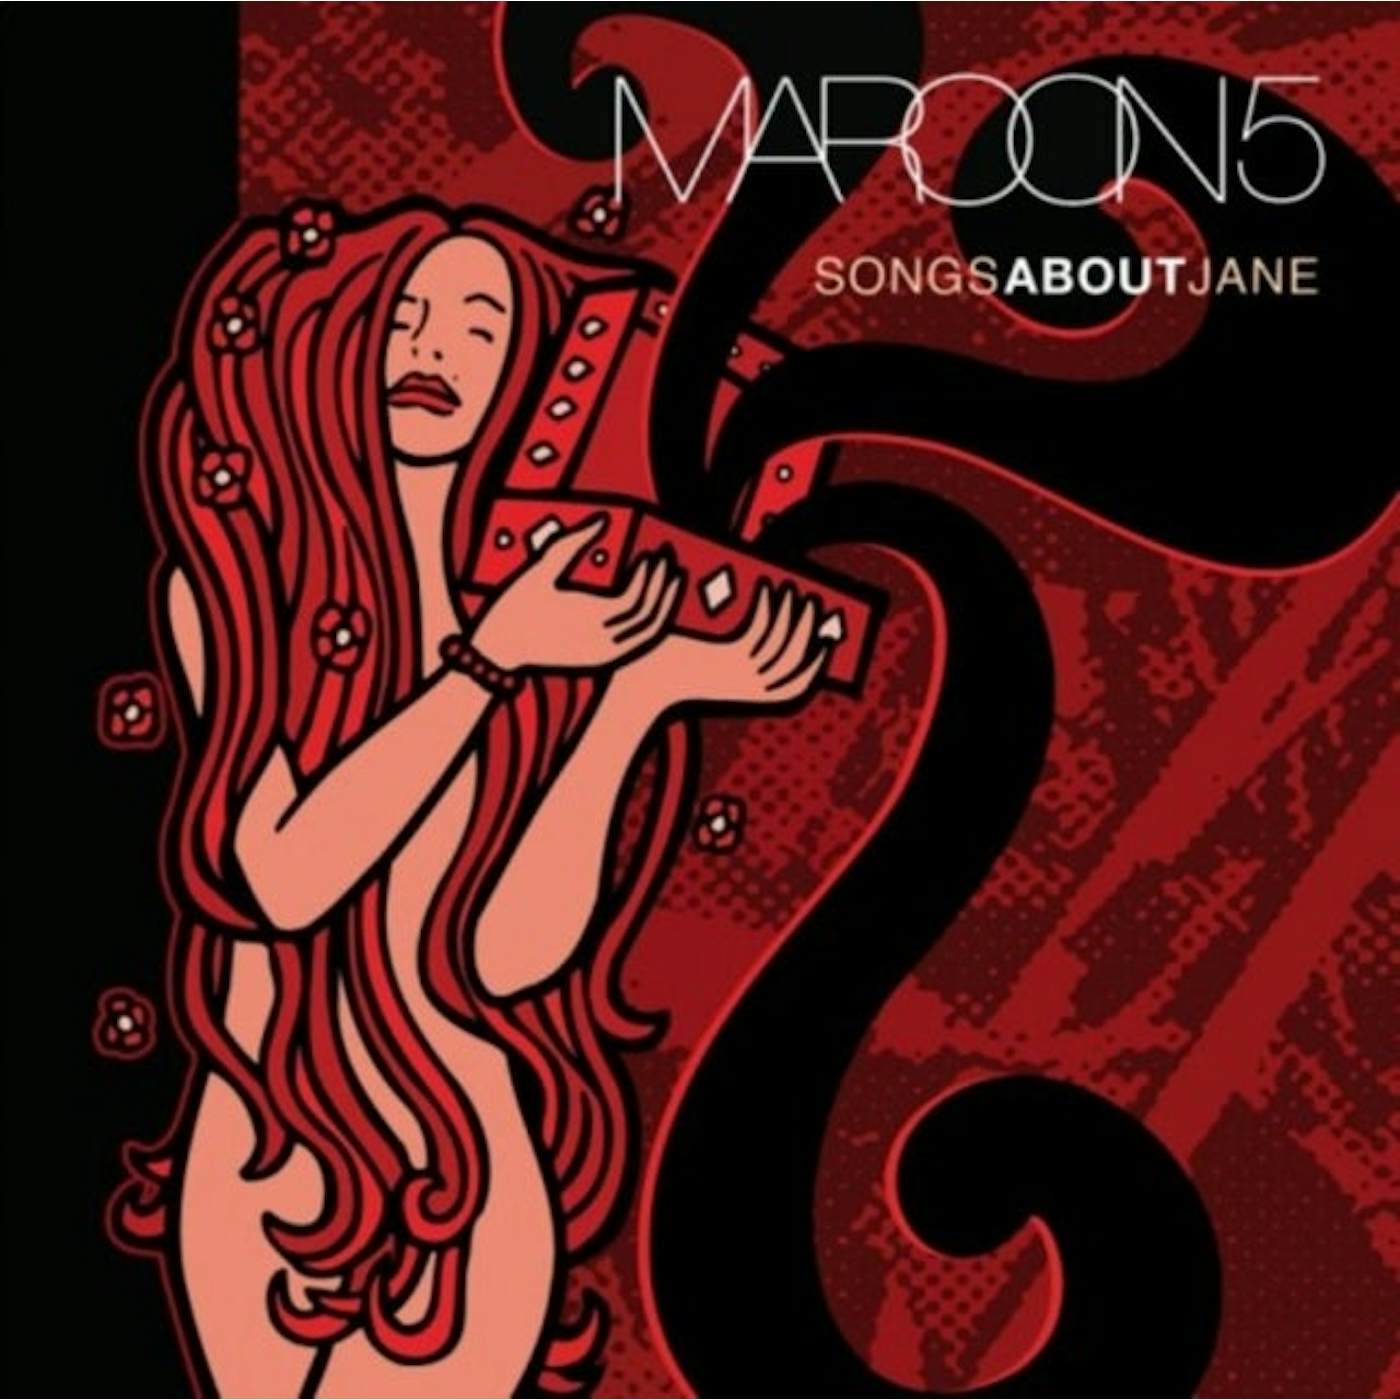 Maroon 5 LP Vinyl Record - Songs About Jane